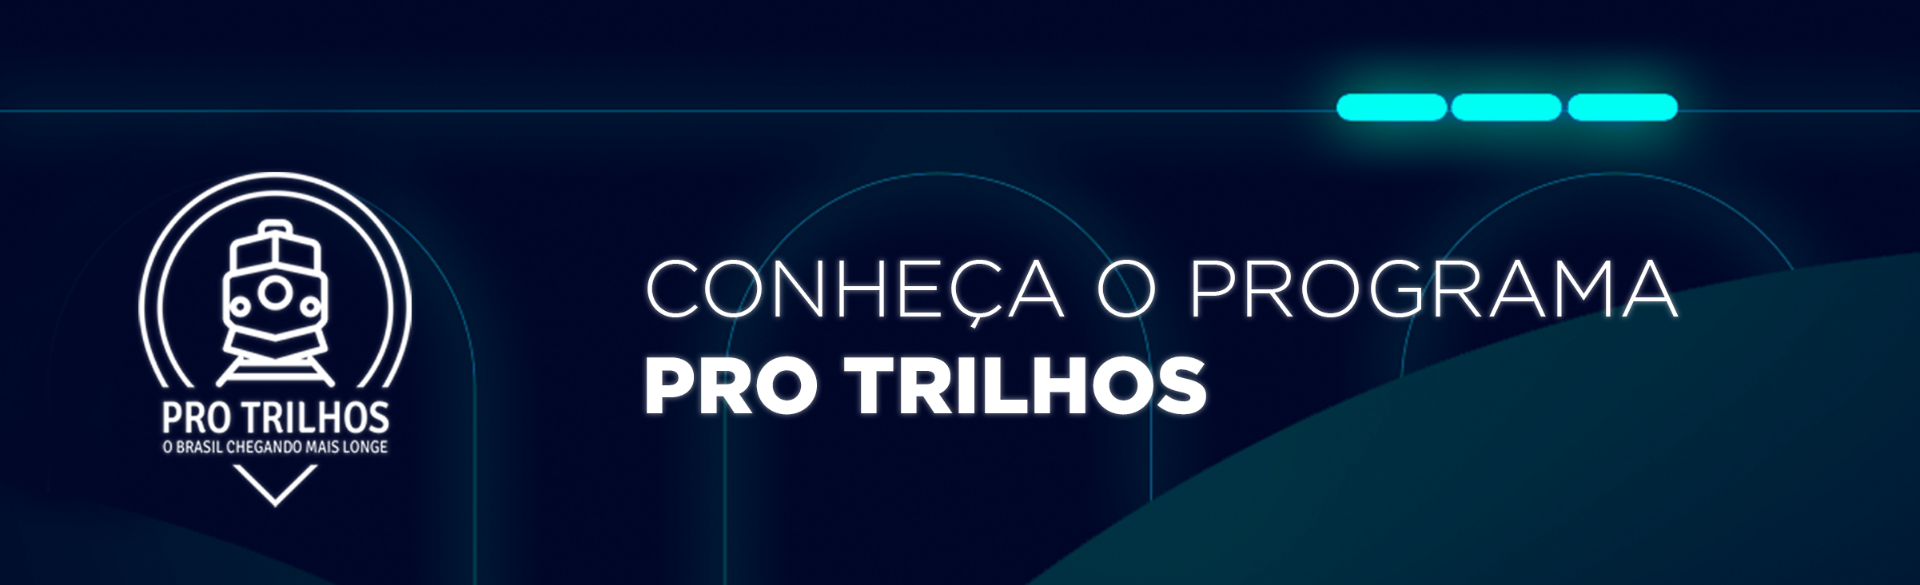 banner_protrilhos_home.png